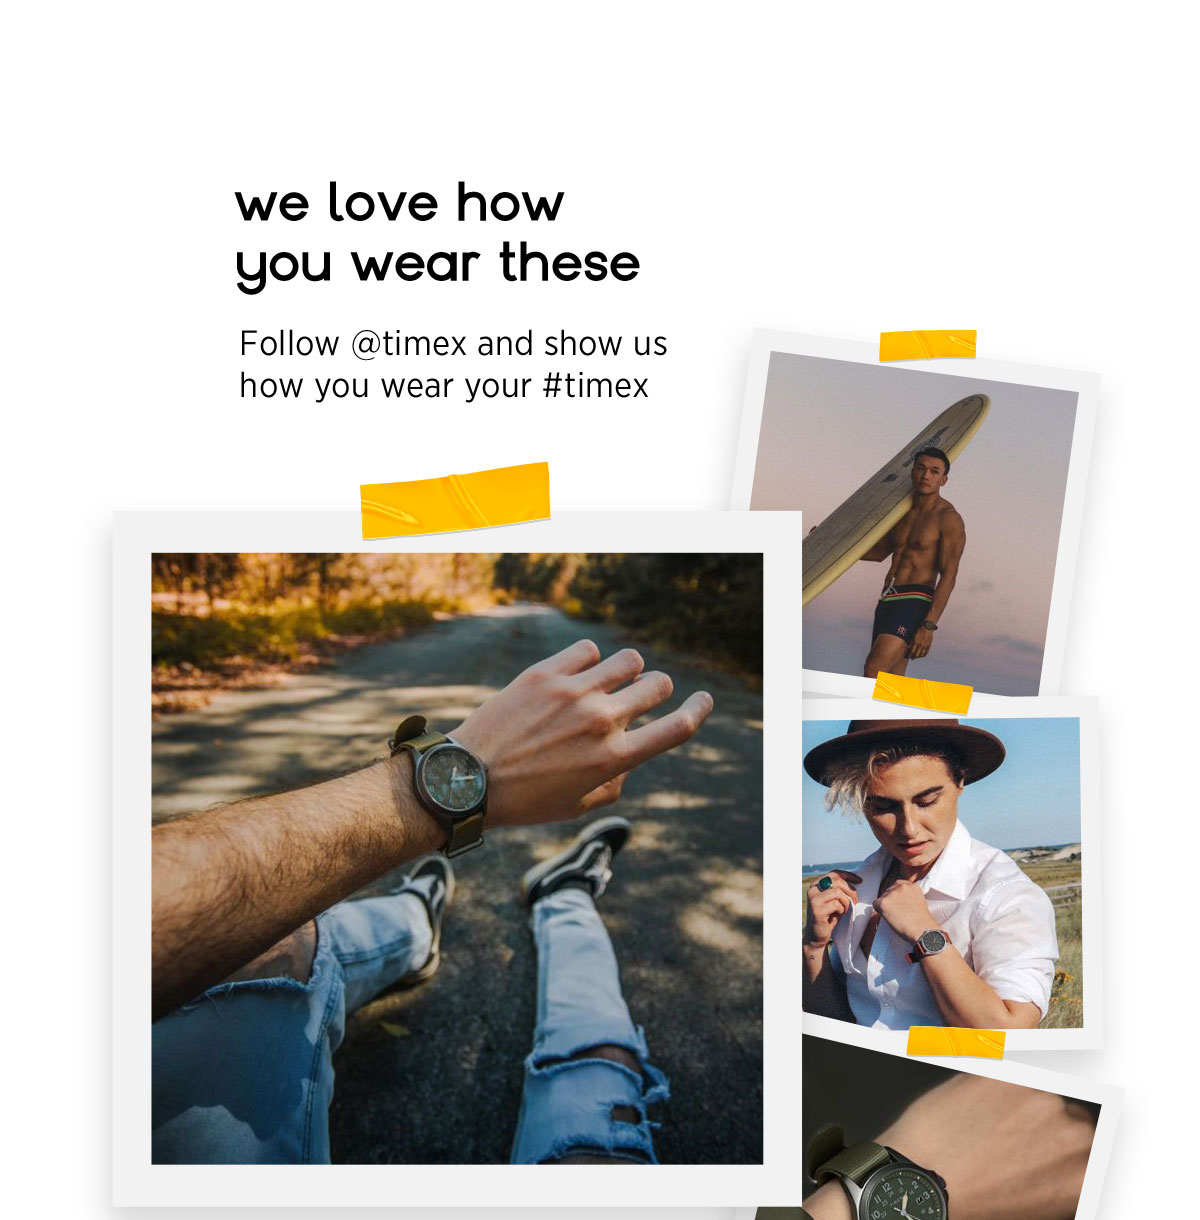 We love how you wear these | Follow Timex and show us how you wear your #timex